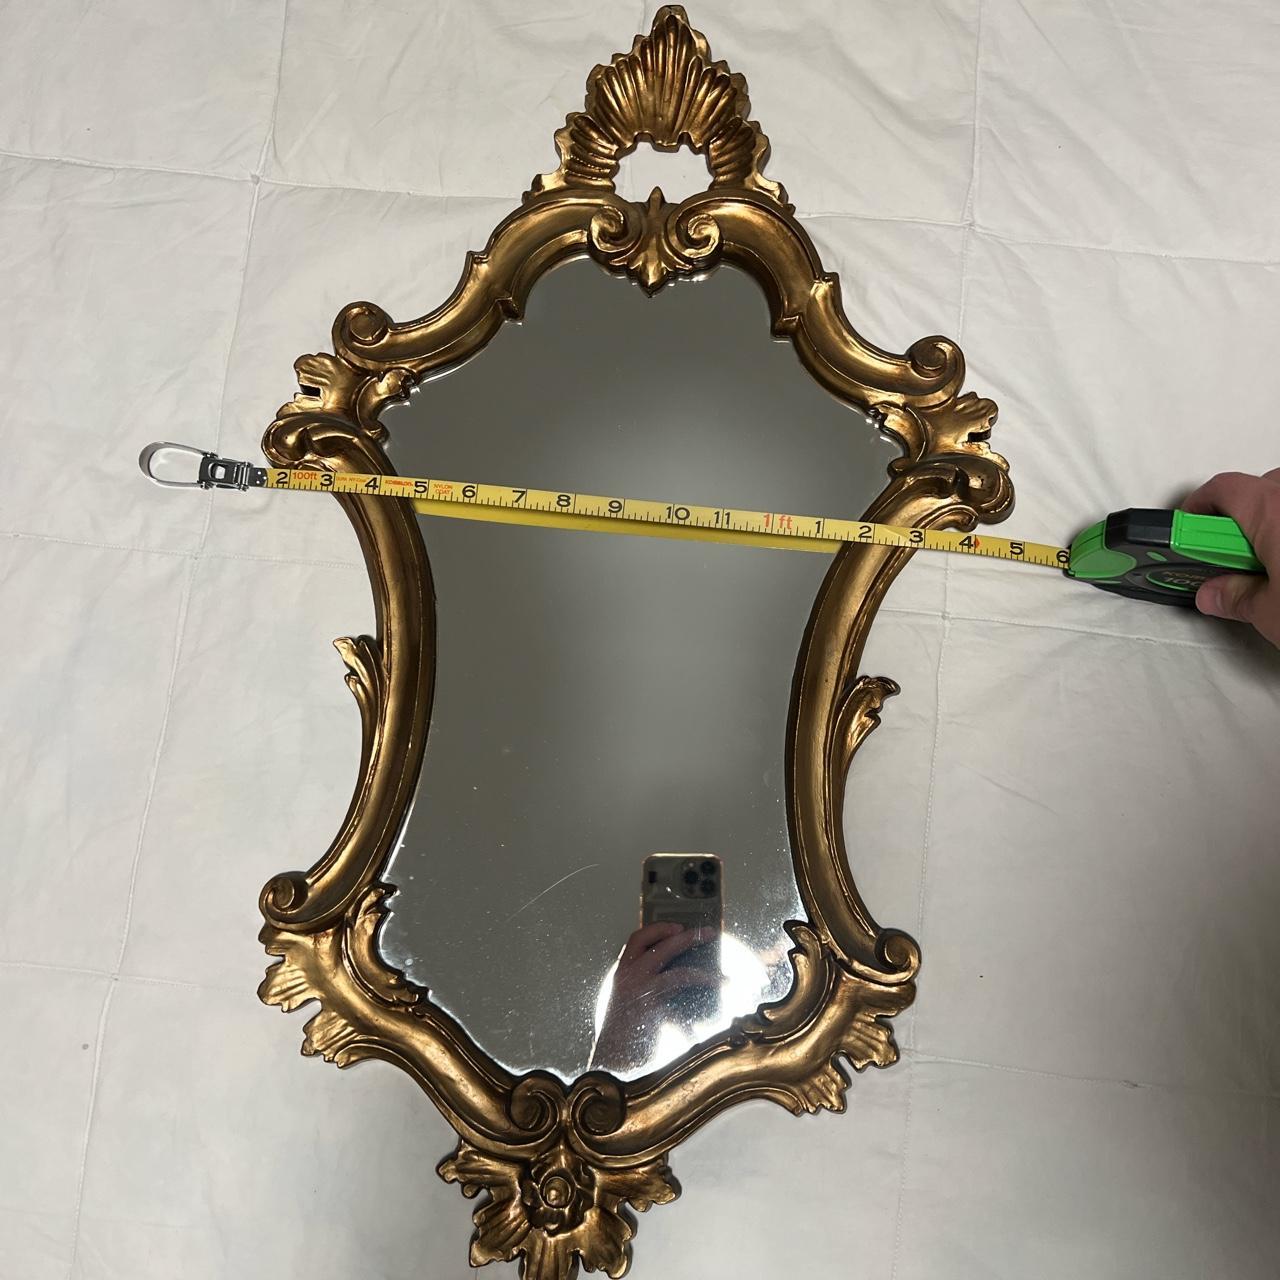 gold frame rococo styled mirror. approximately 2'2